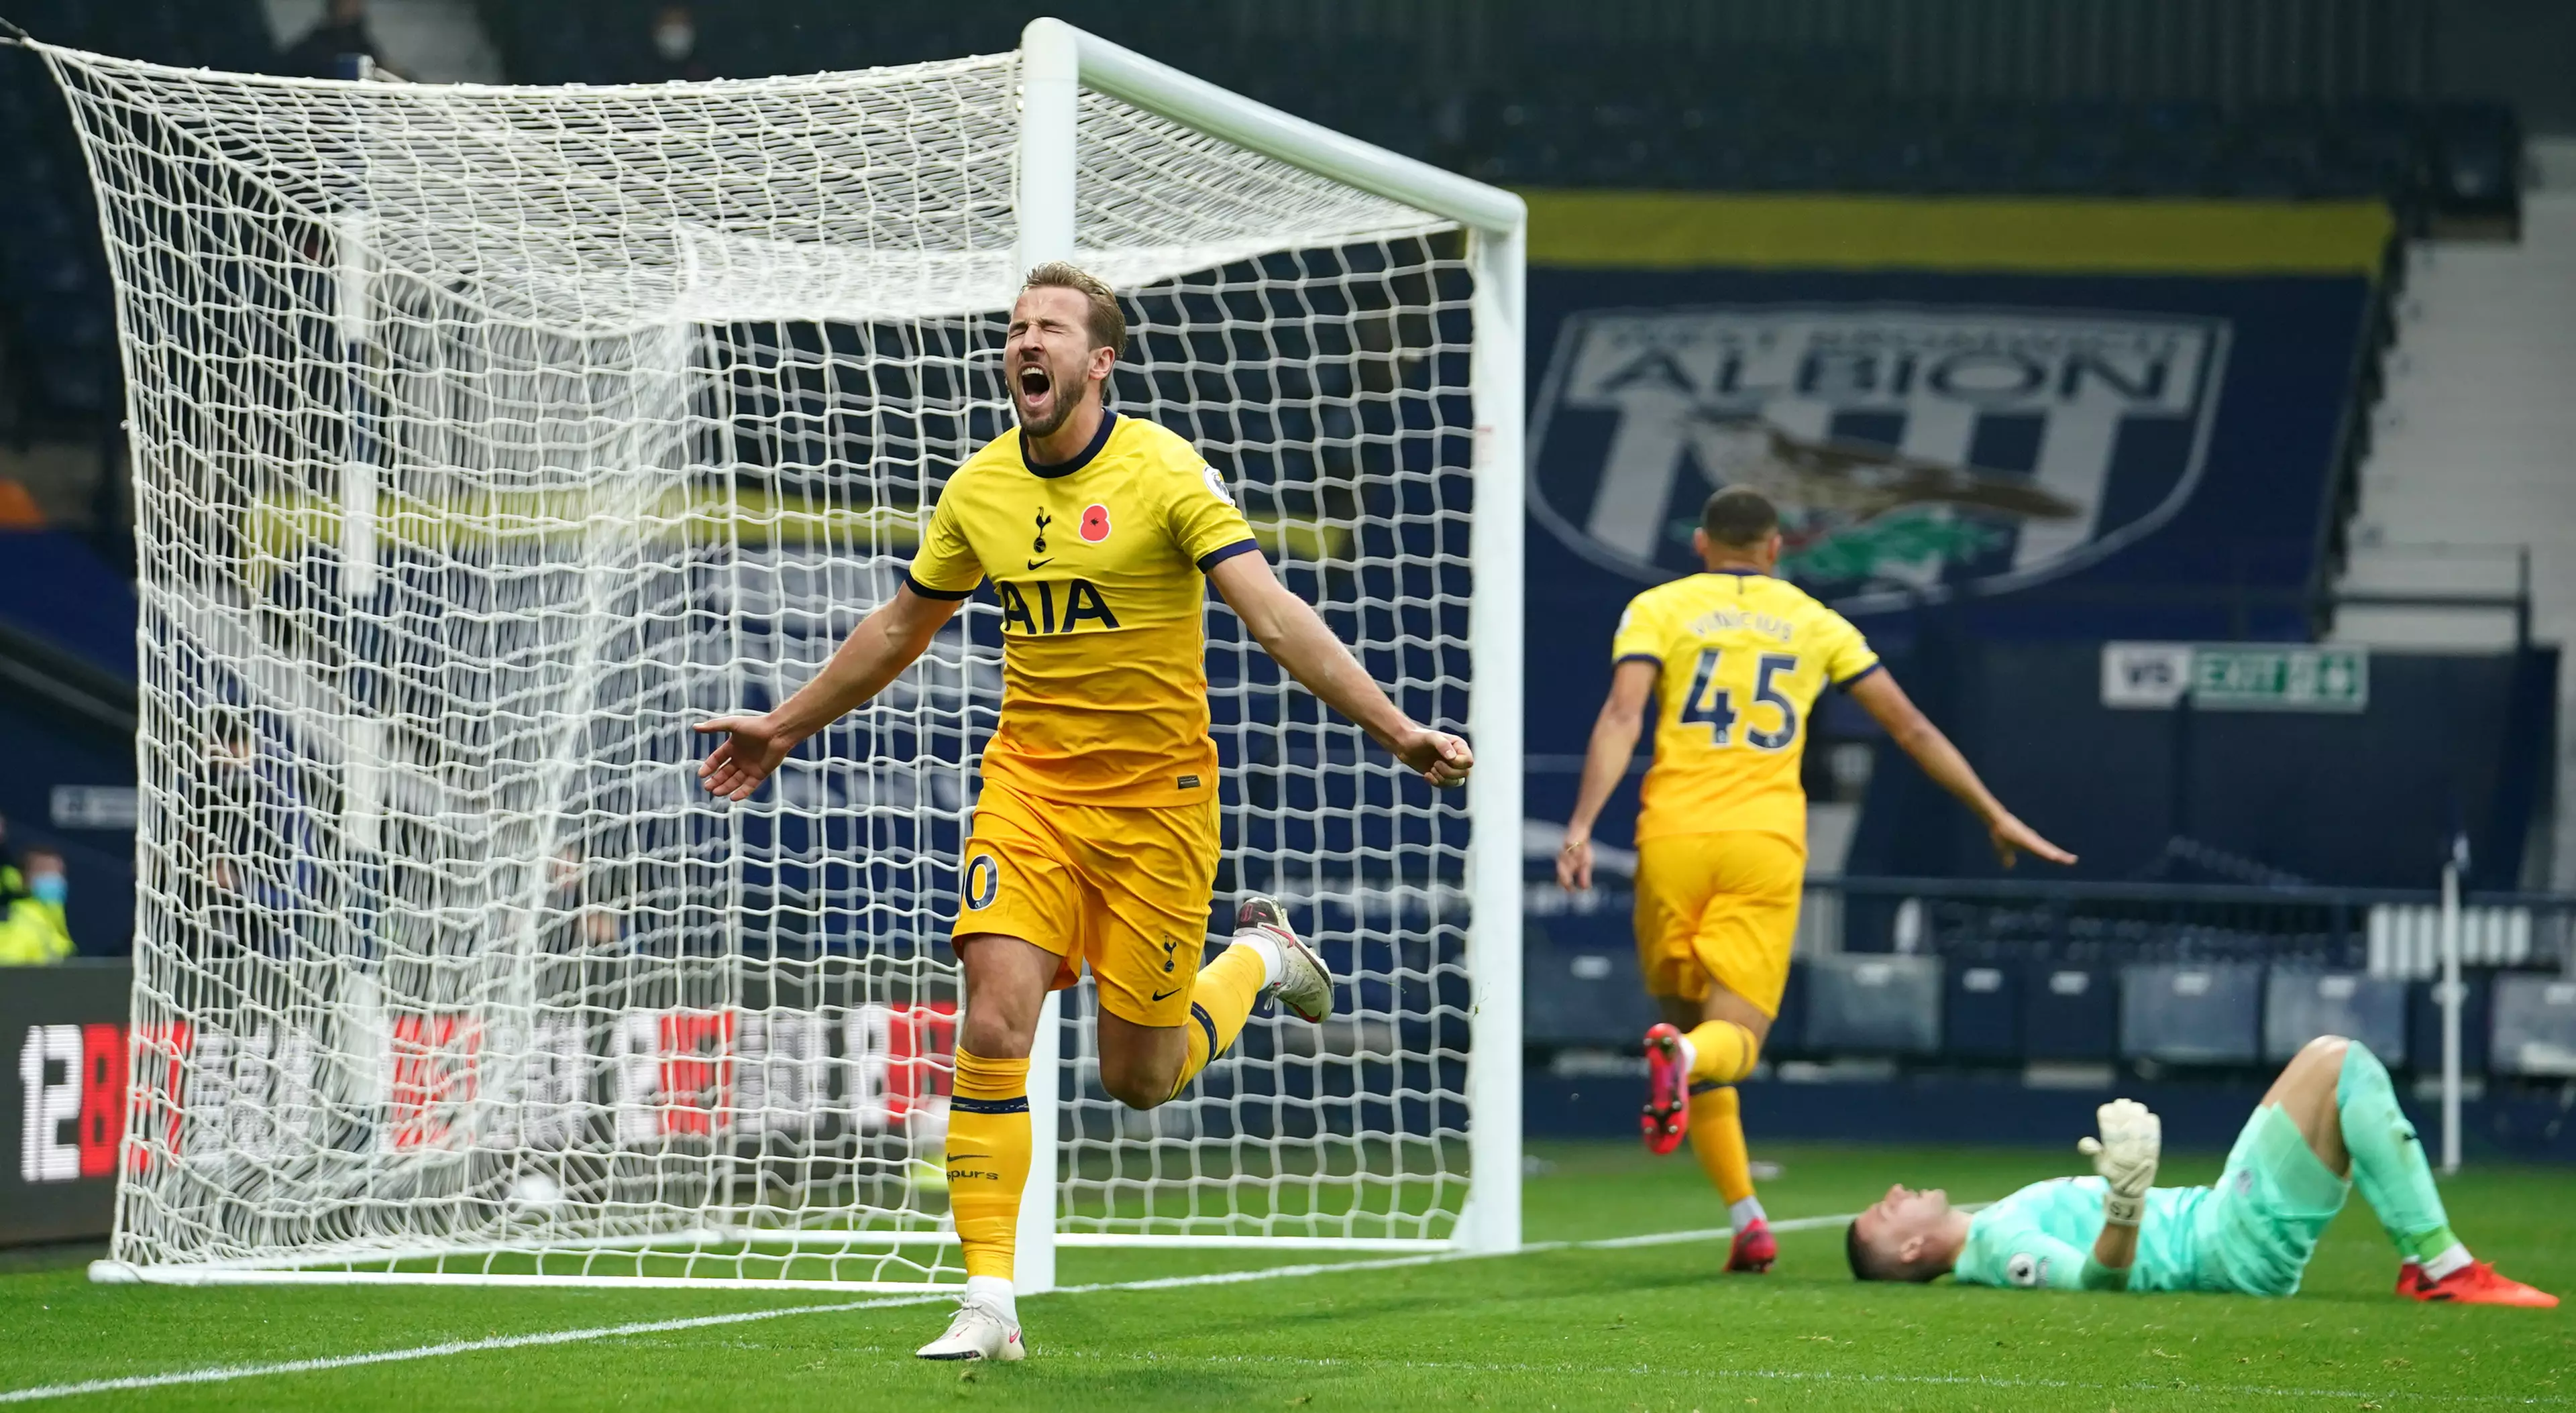 Kane continues to score goals on a regular basis but is yet to turn it into titles. Image: PA Images